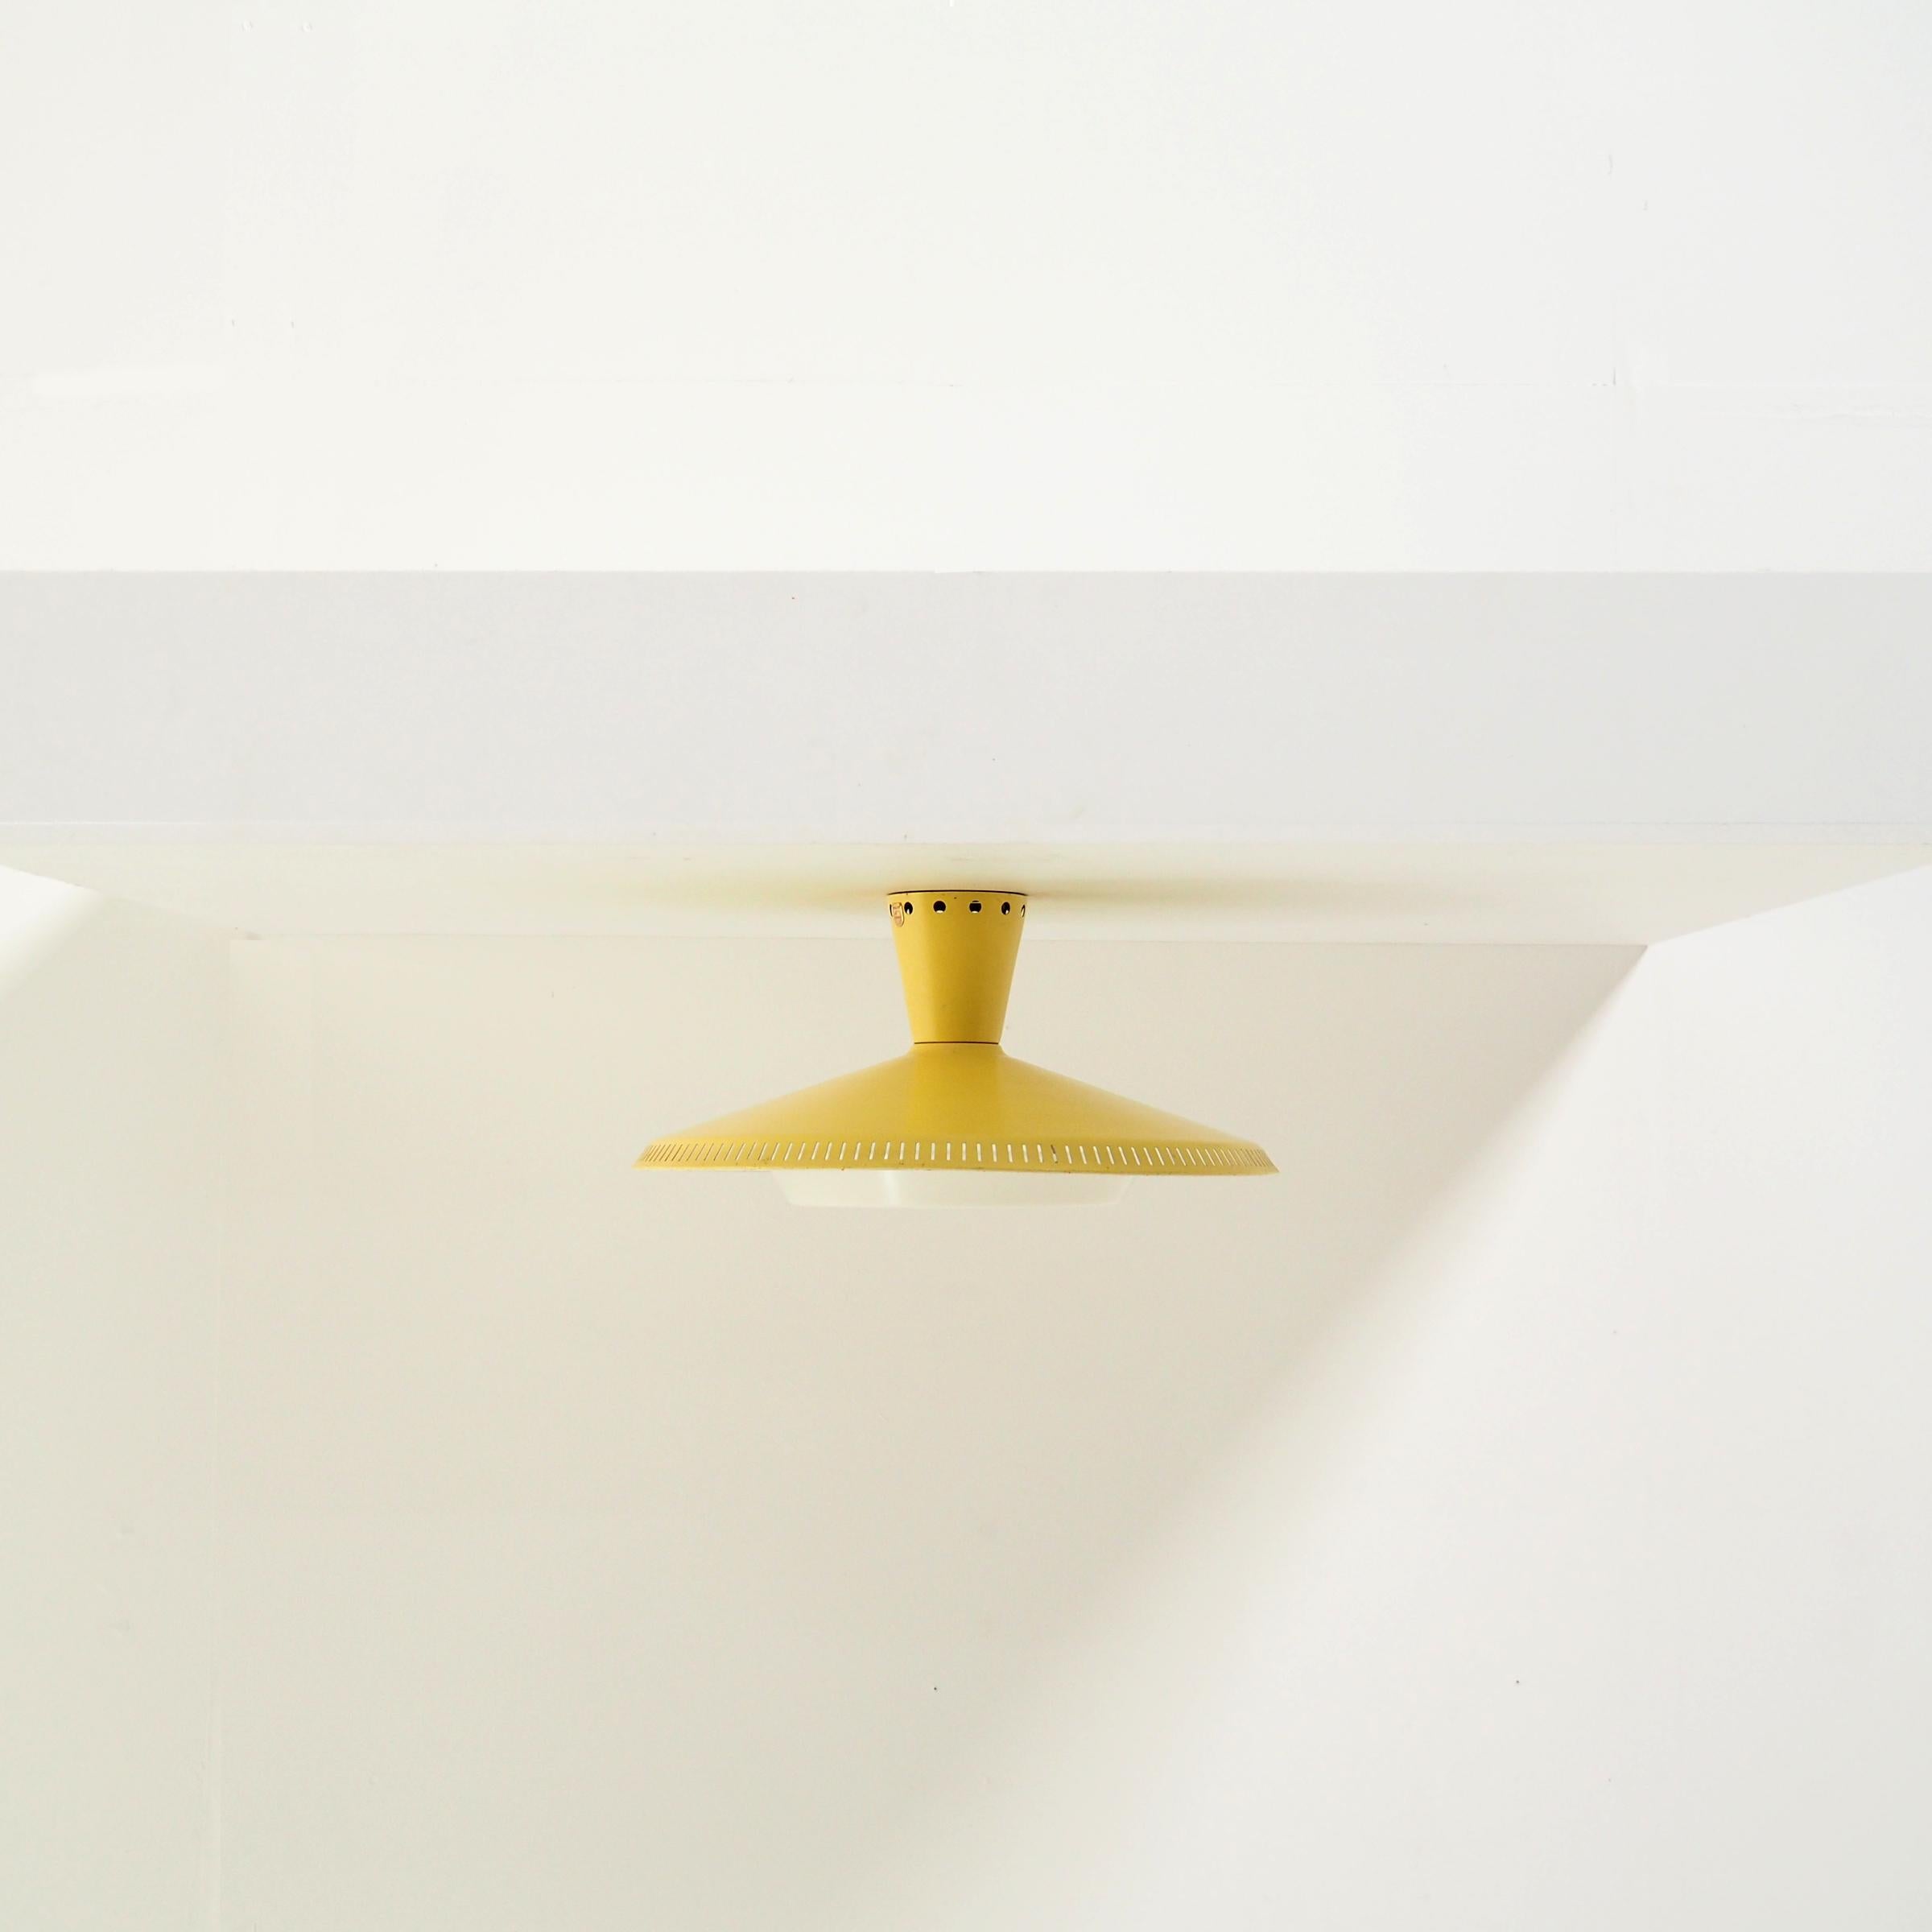 Beautiful flush mount designed in the 1950s by Louis Kalff for the Dutch company Philips. It has got the typical 1950s modern look whith a beautiful soft yellow color.
Please not that this lamp still has its original lamp shade. I mean both parts of